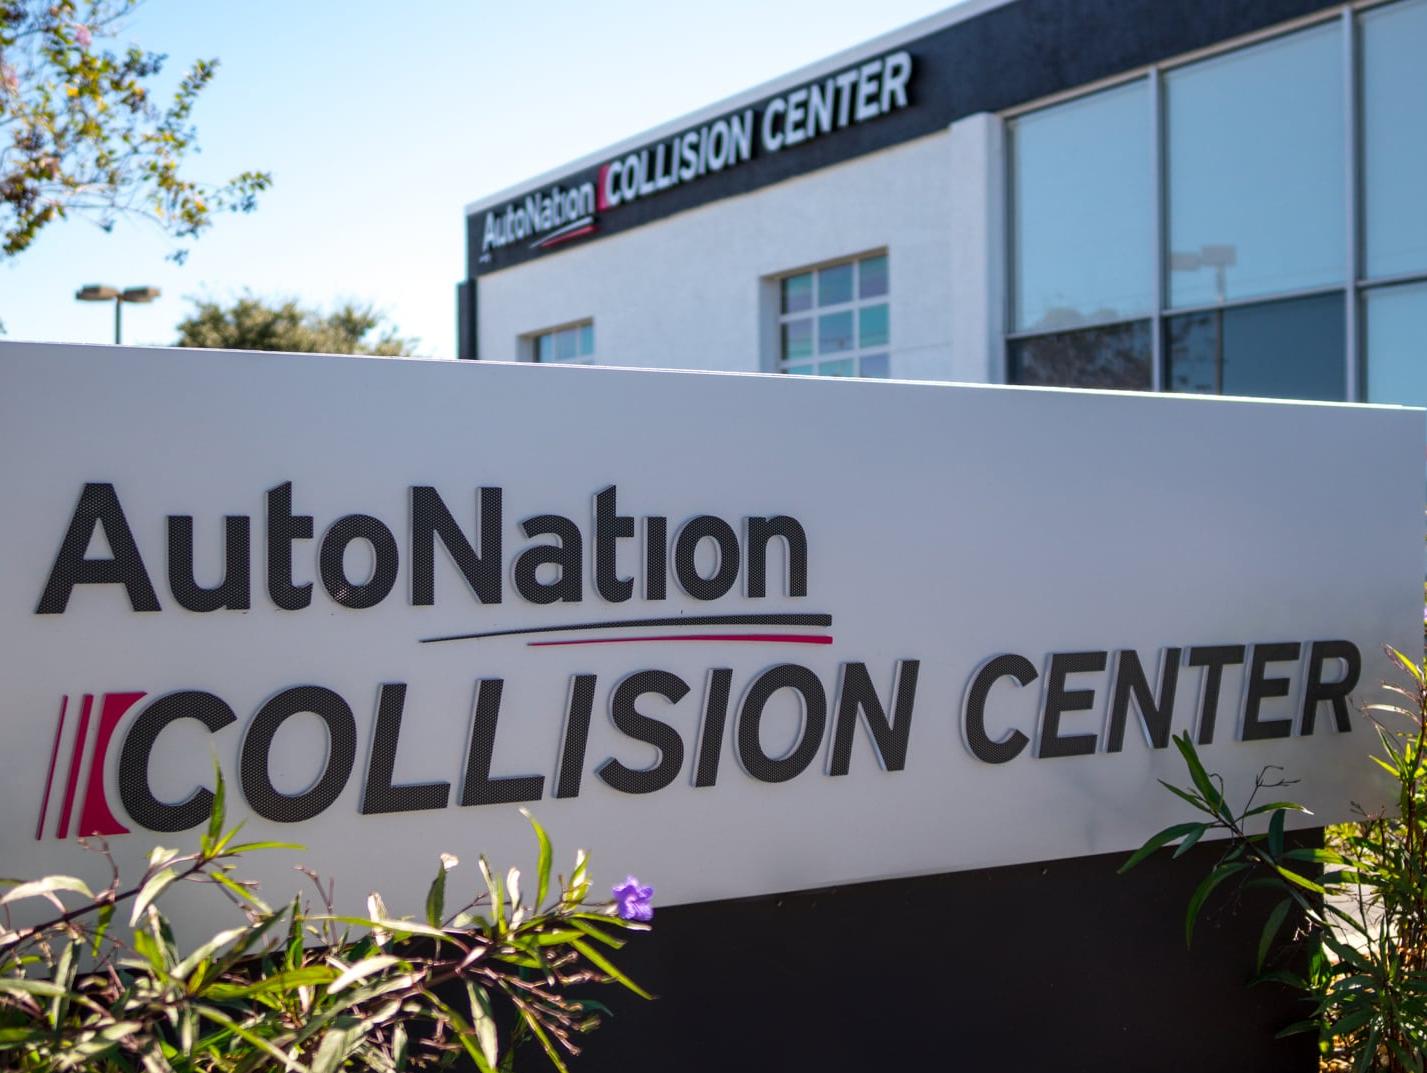 Exterior view of collision center in front of AutoNation Chevrolet South Corpus Christi